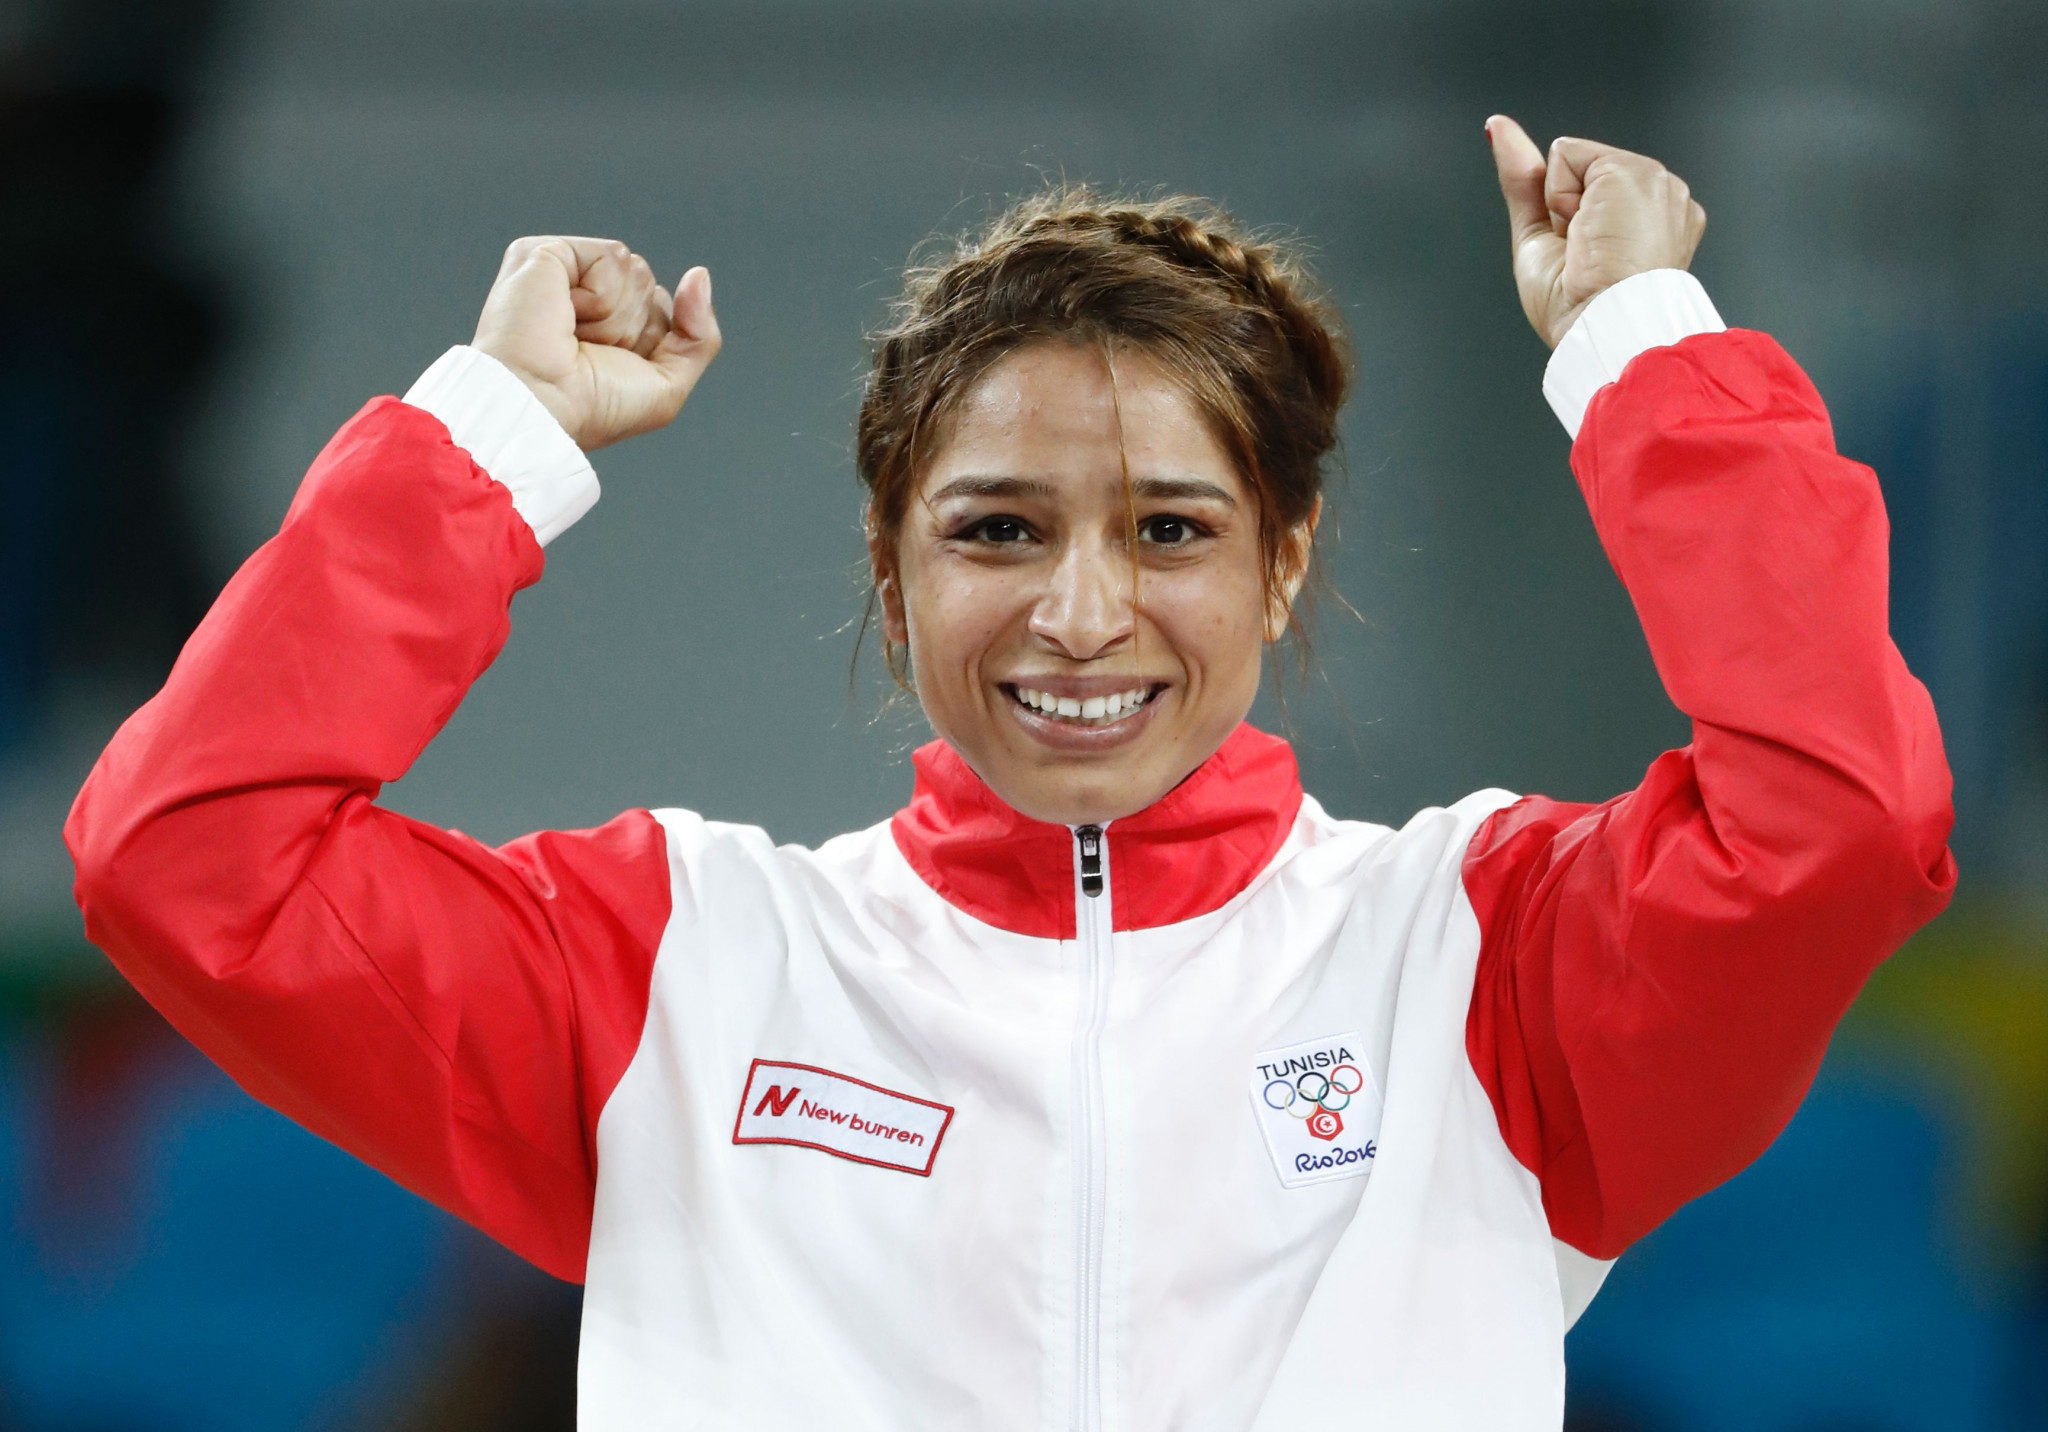 Tunisia's Marwa Amri was the first African woman to reach a Senior World Championships final ©Getty Images